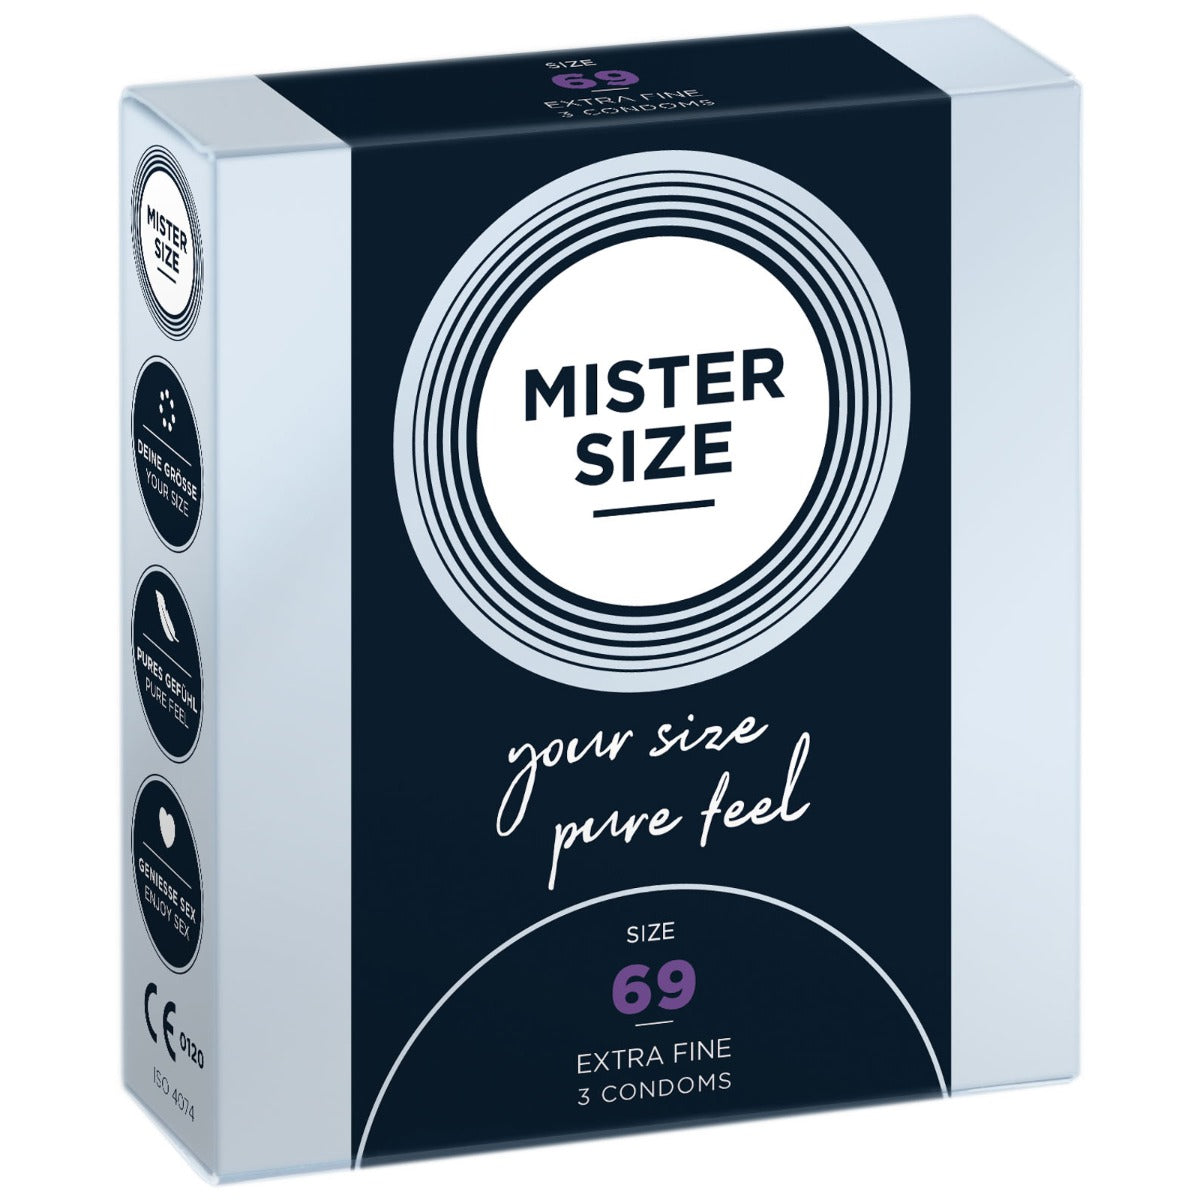 MISTER SIZE | Pure feel Condoms - Size 69 mm (3 pack)